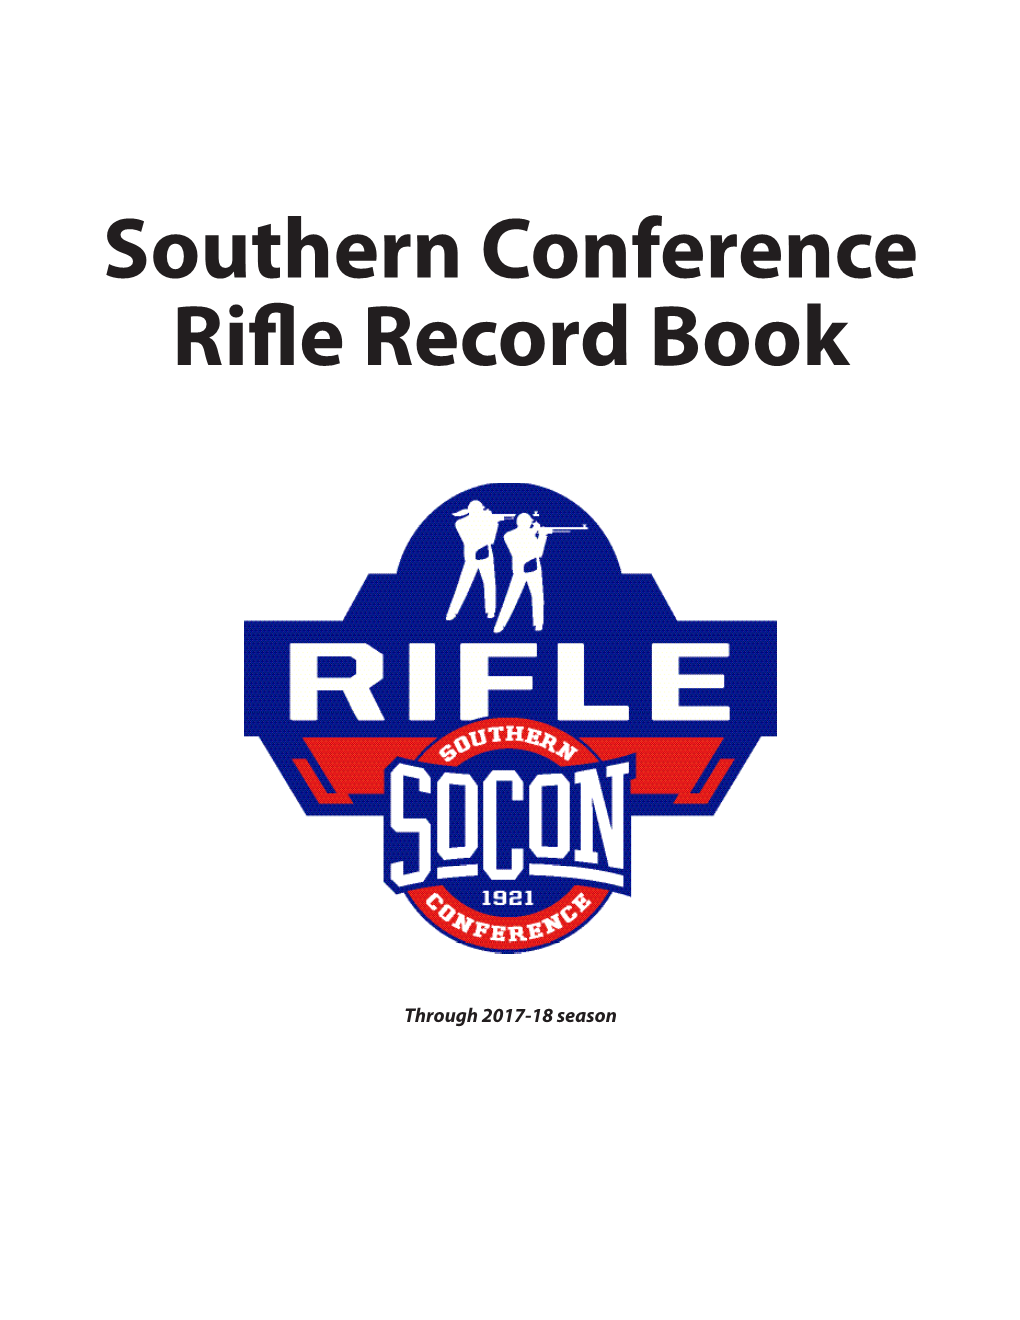 Southern Conference Rifle Record Book